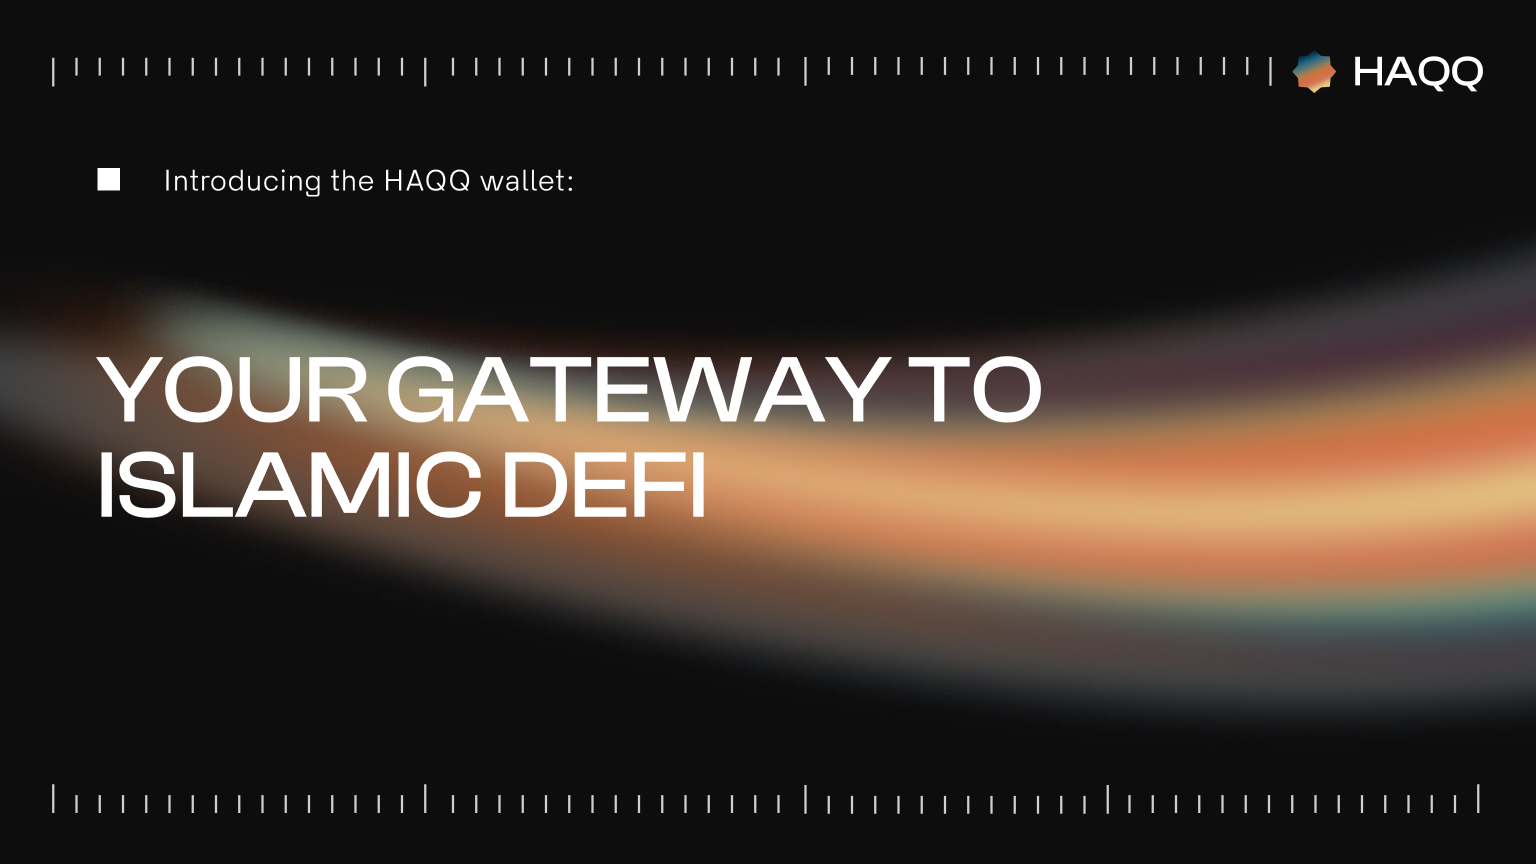 Introducing the HAQQ Wallet: Your Gateway to Islamic DeFi